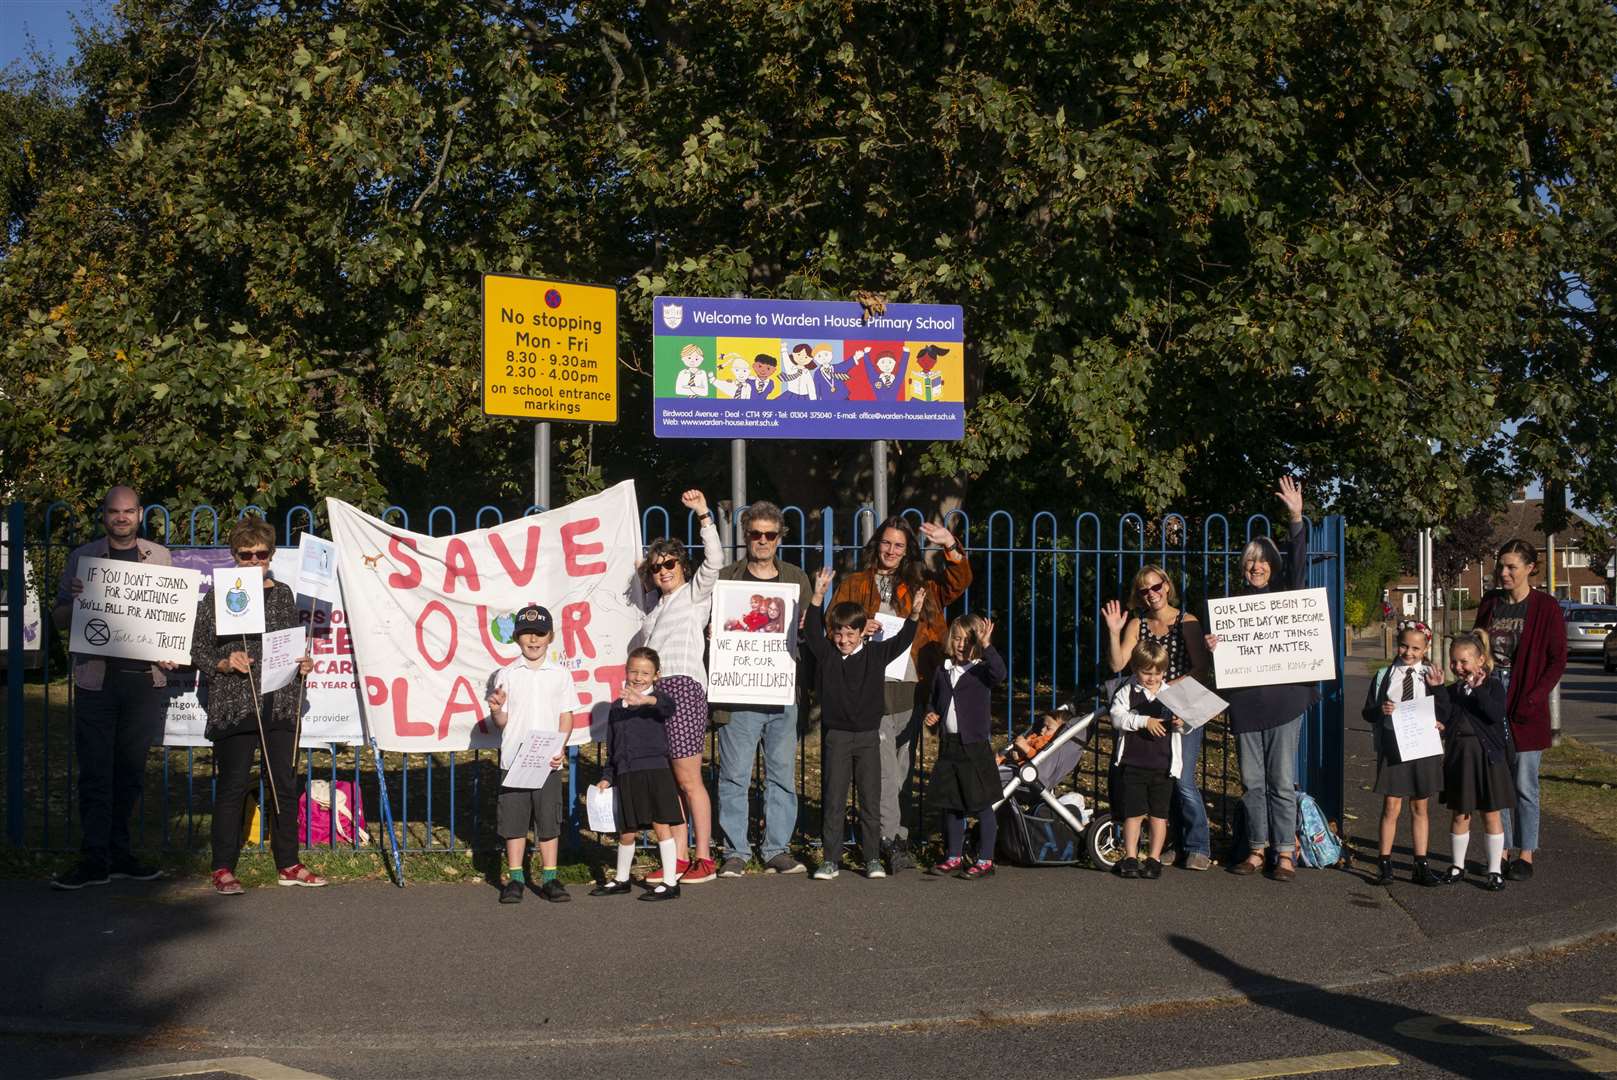 Grandparents, parents and pupils from Warden House Primary School joined in the protests at the school gates